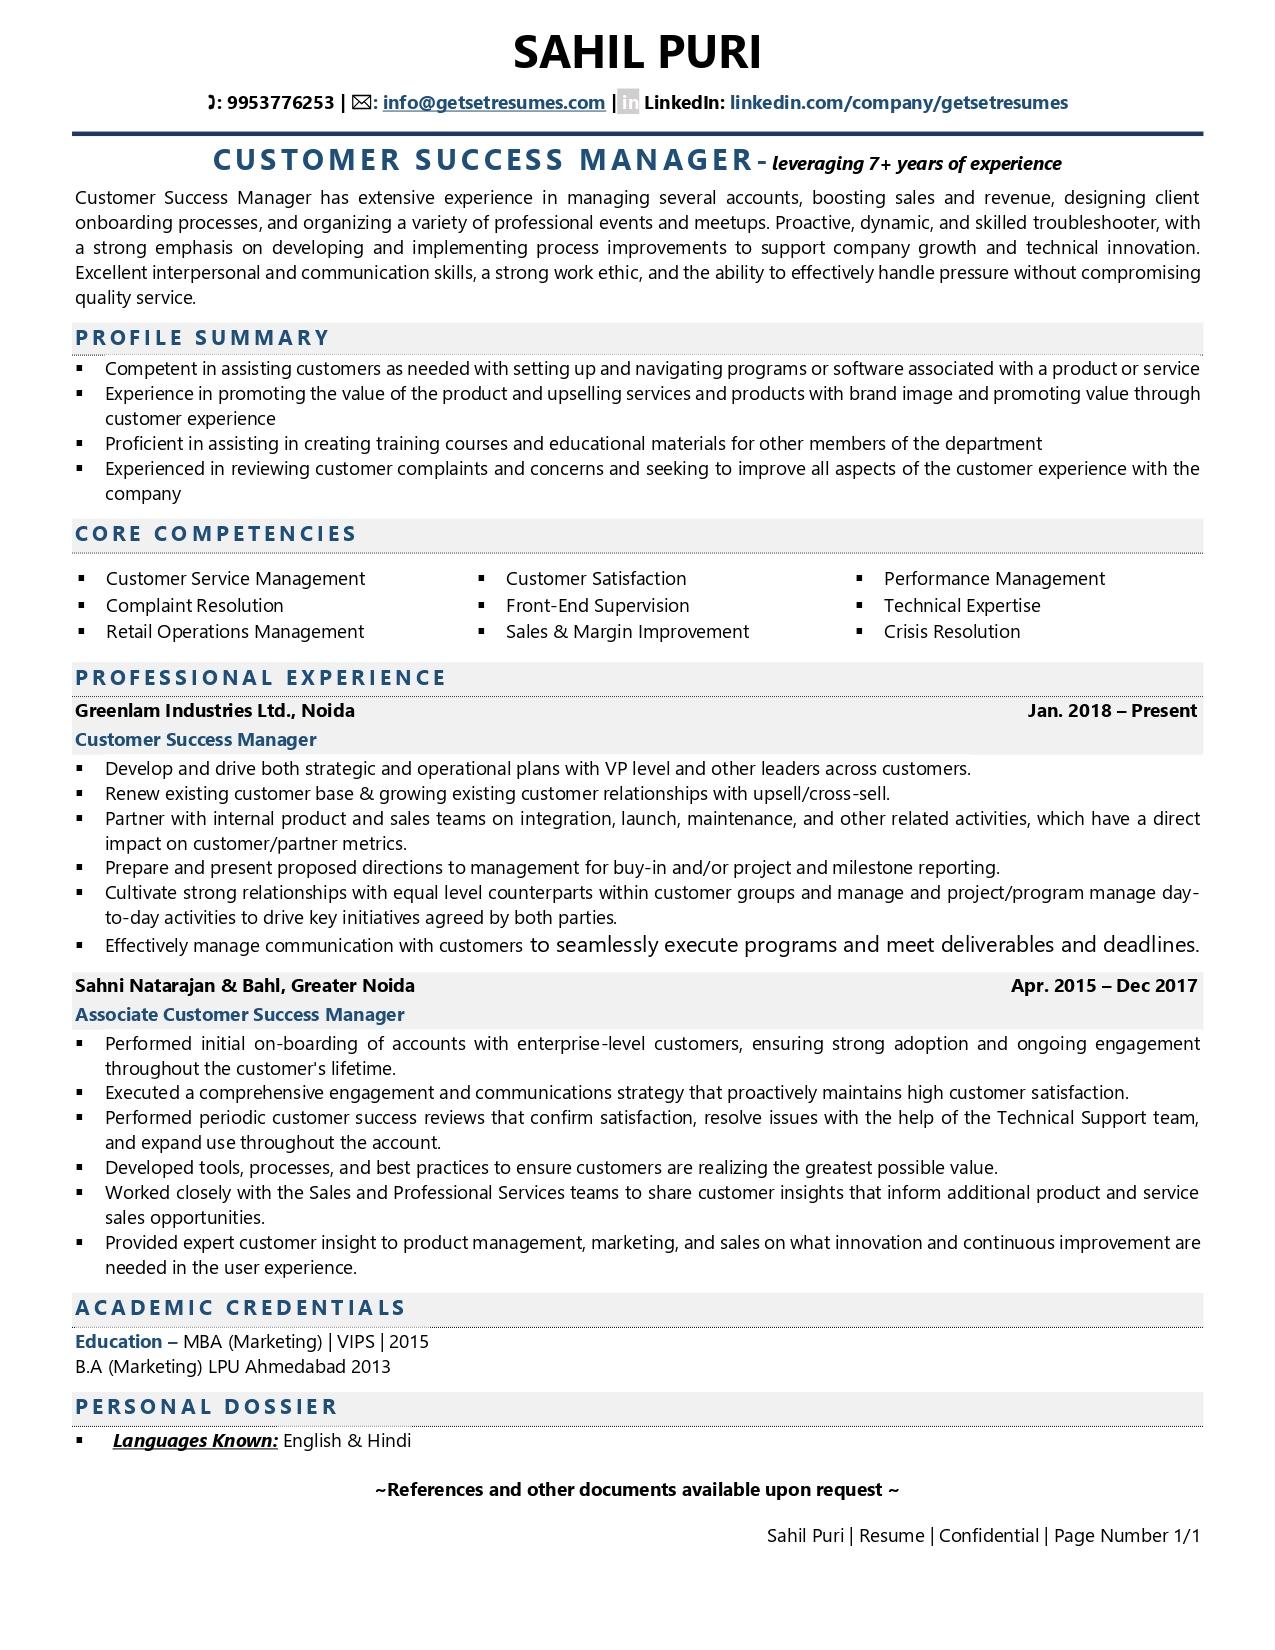 Customer Success Manager - Resume Example & Template